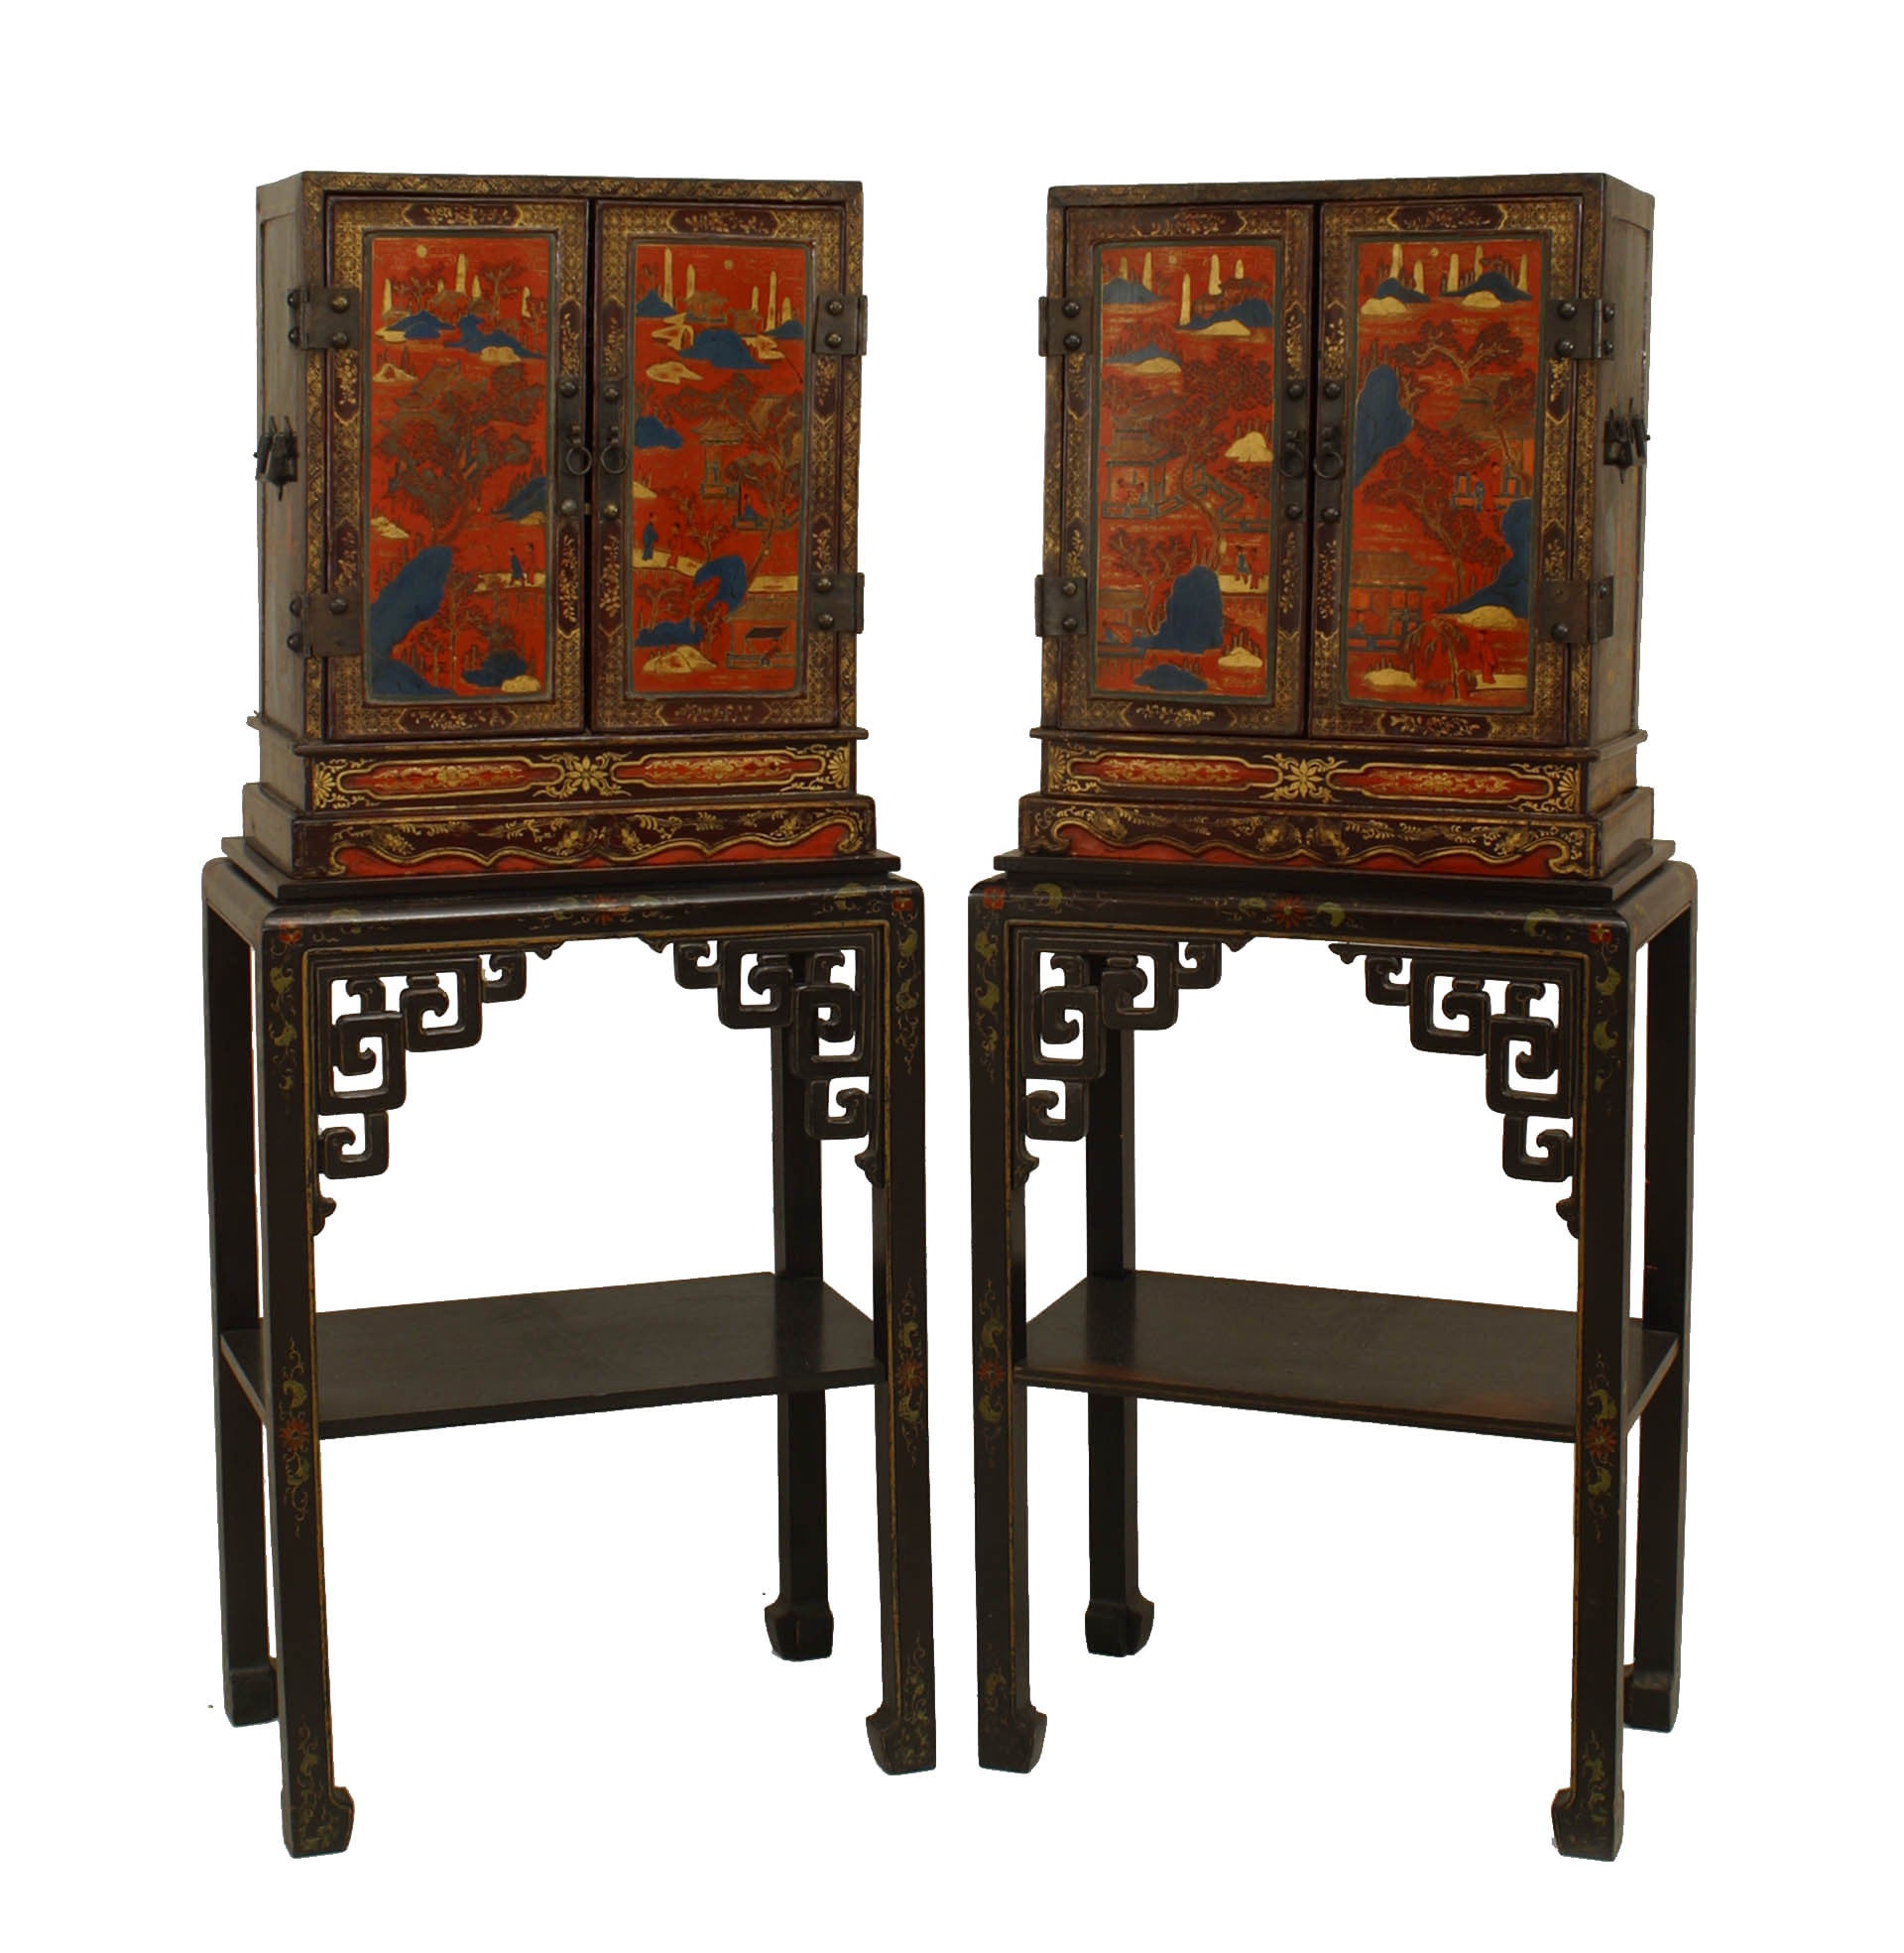 Pair of Chinese Decorated Lacquered Cabinets